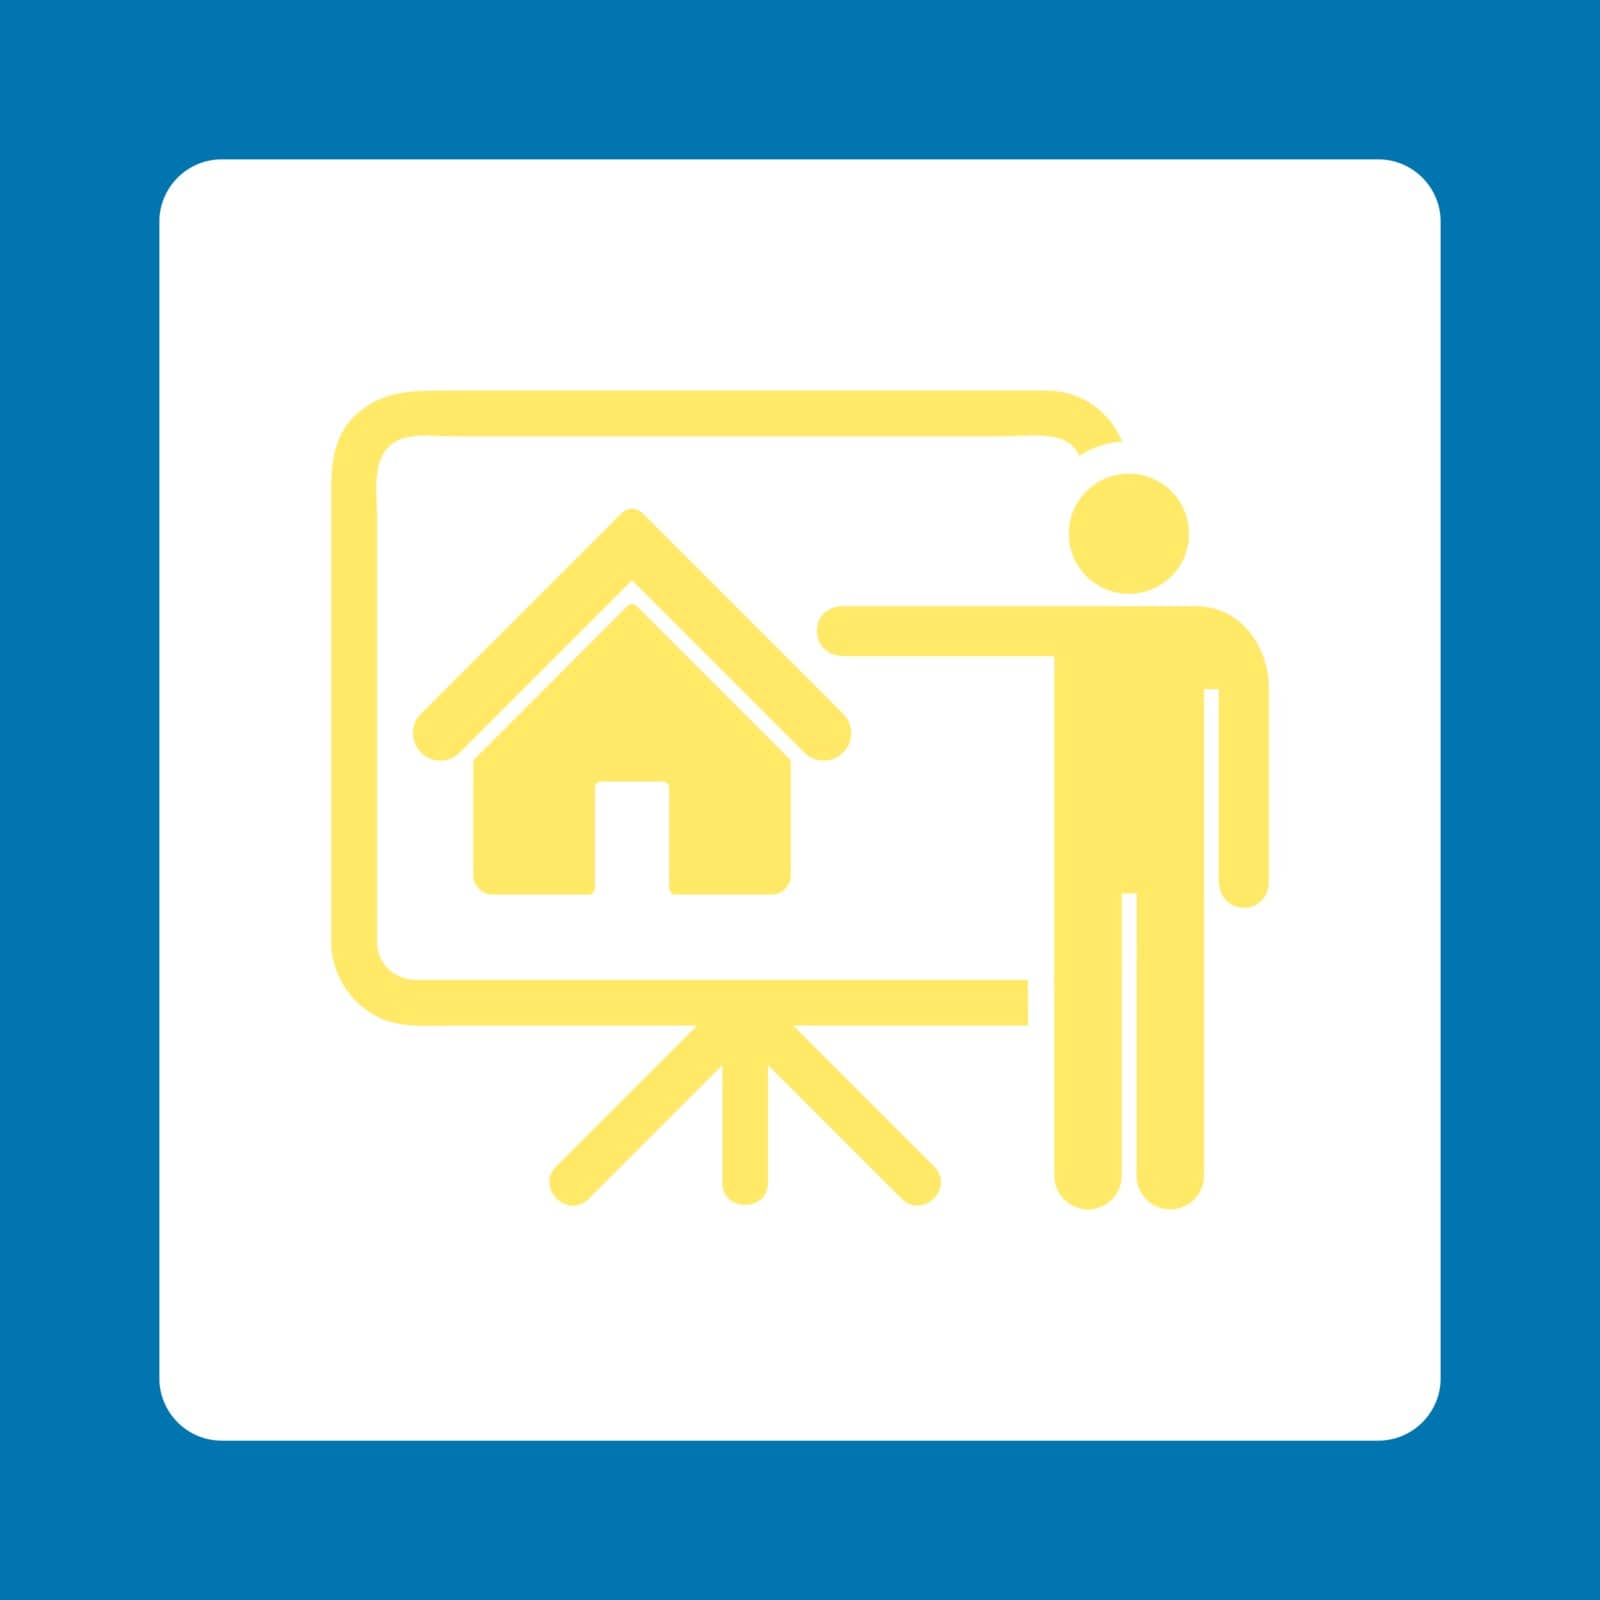 Realtor icon. Vector style is yellow and white colors, flat rounded square button on a blue background.